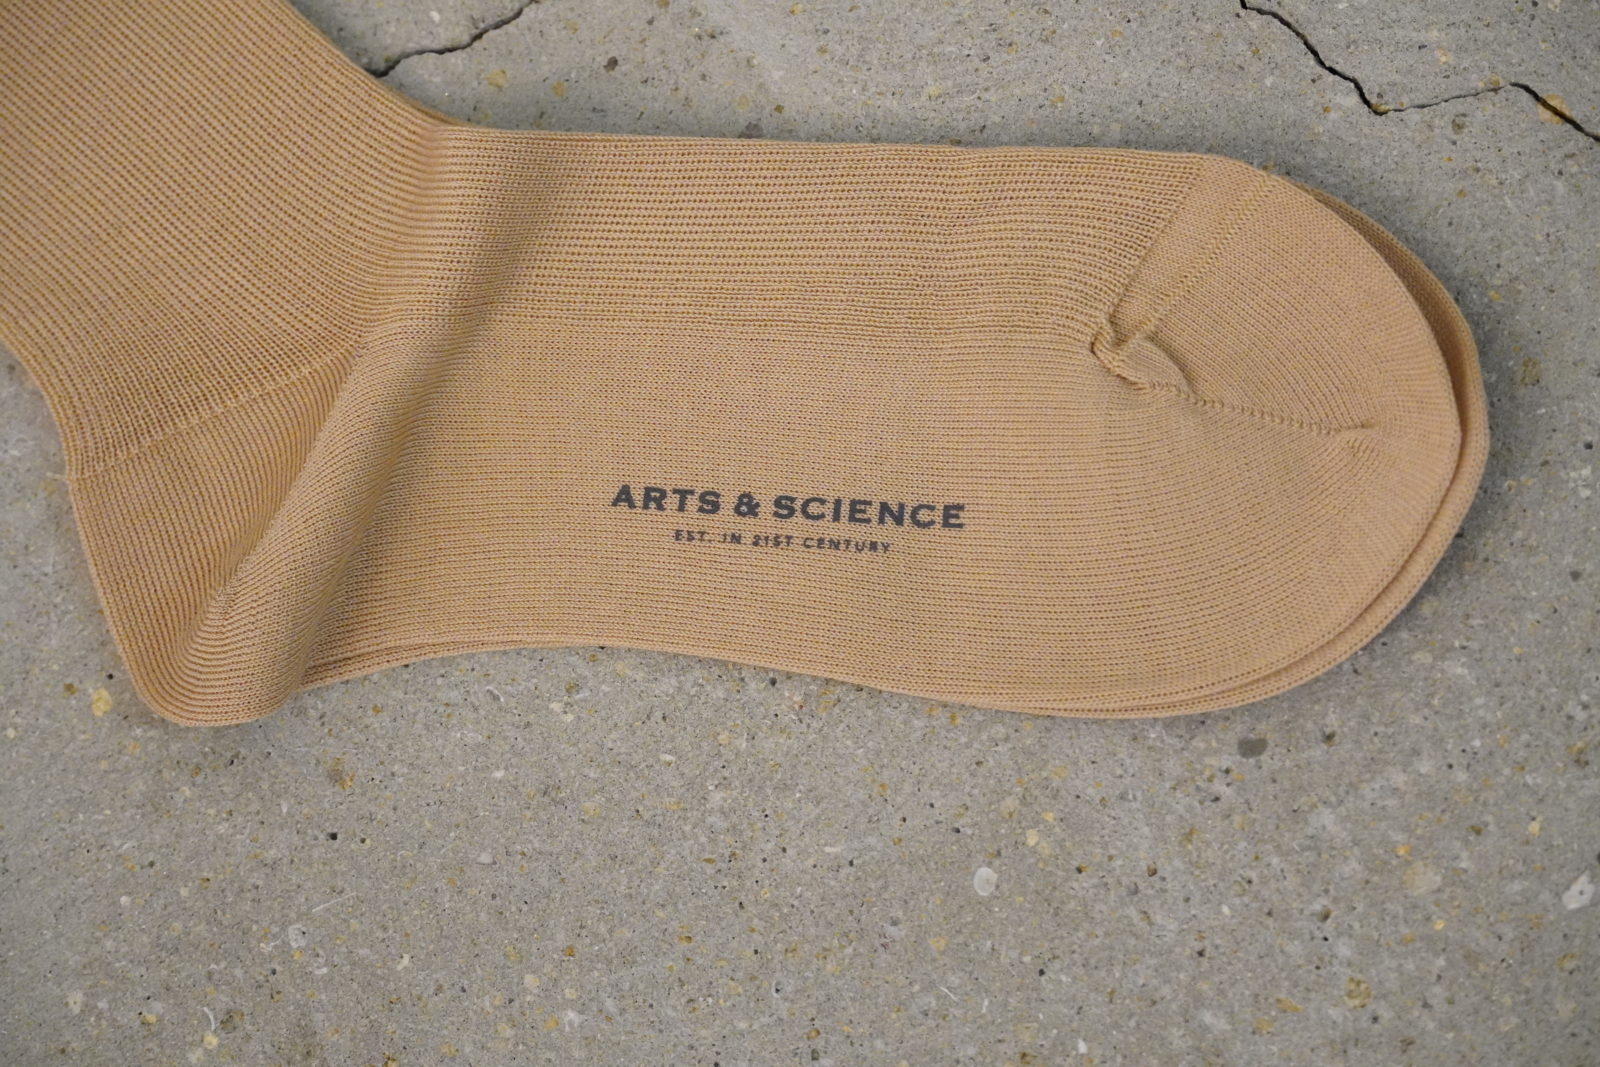 ARTS&SCIENCE New arrival – PICTURE